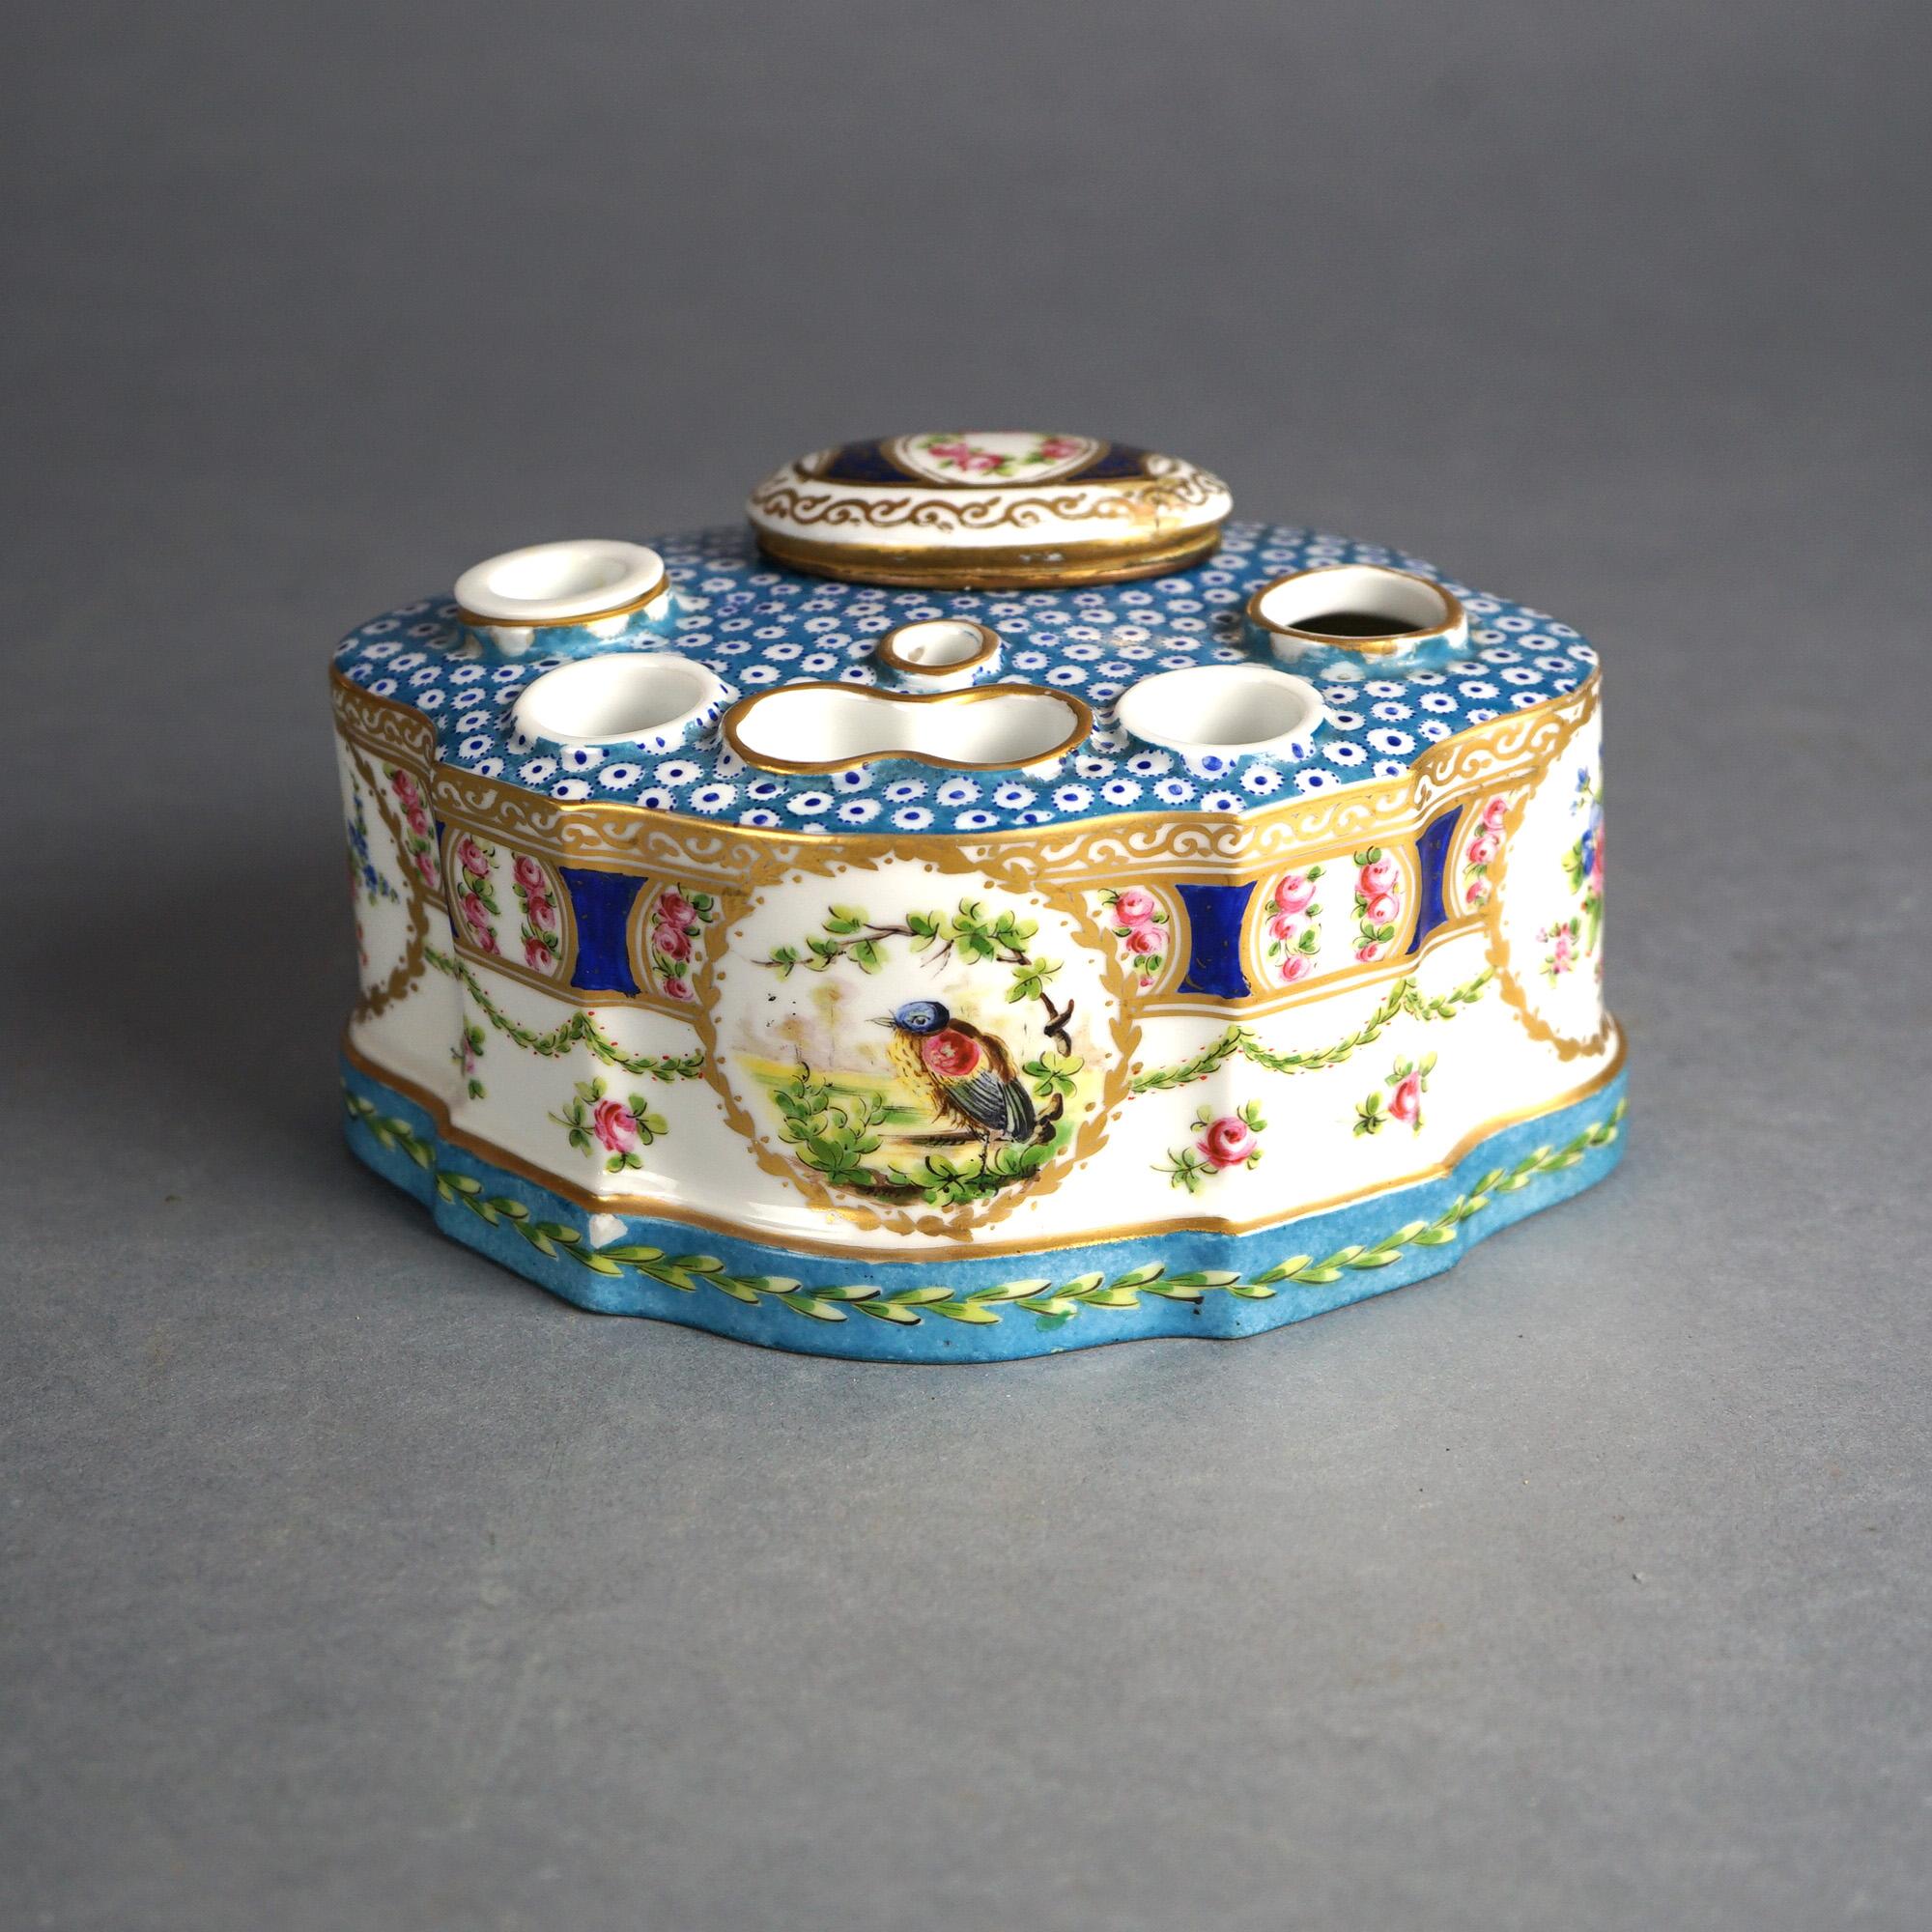 Antique French Sevrés inkwell offers porcelain construction in shaped form and having hand painted floral decoration and reserve with a bird, gilt highlights throughout, maker mark en verso as photographed, c1890

Measures - 4